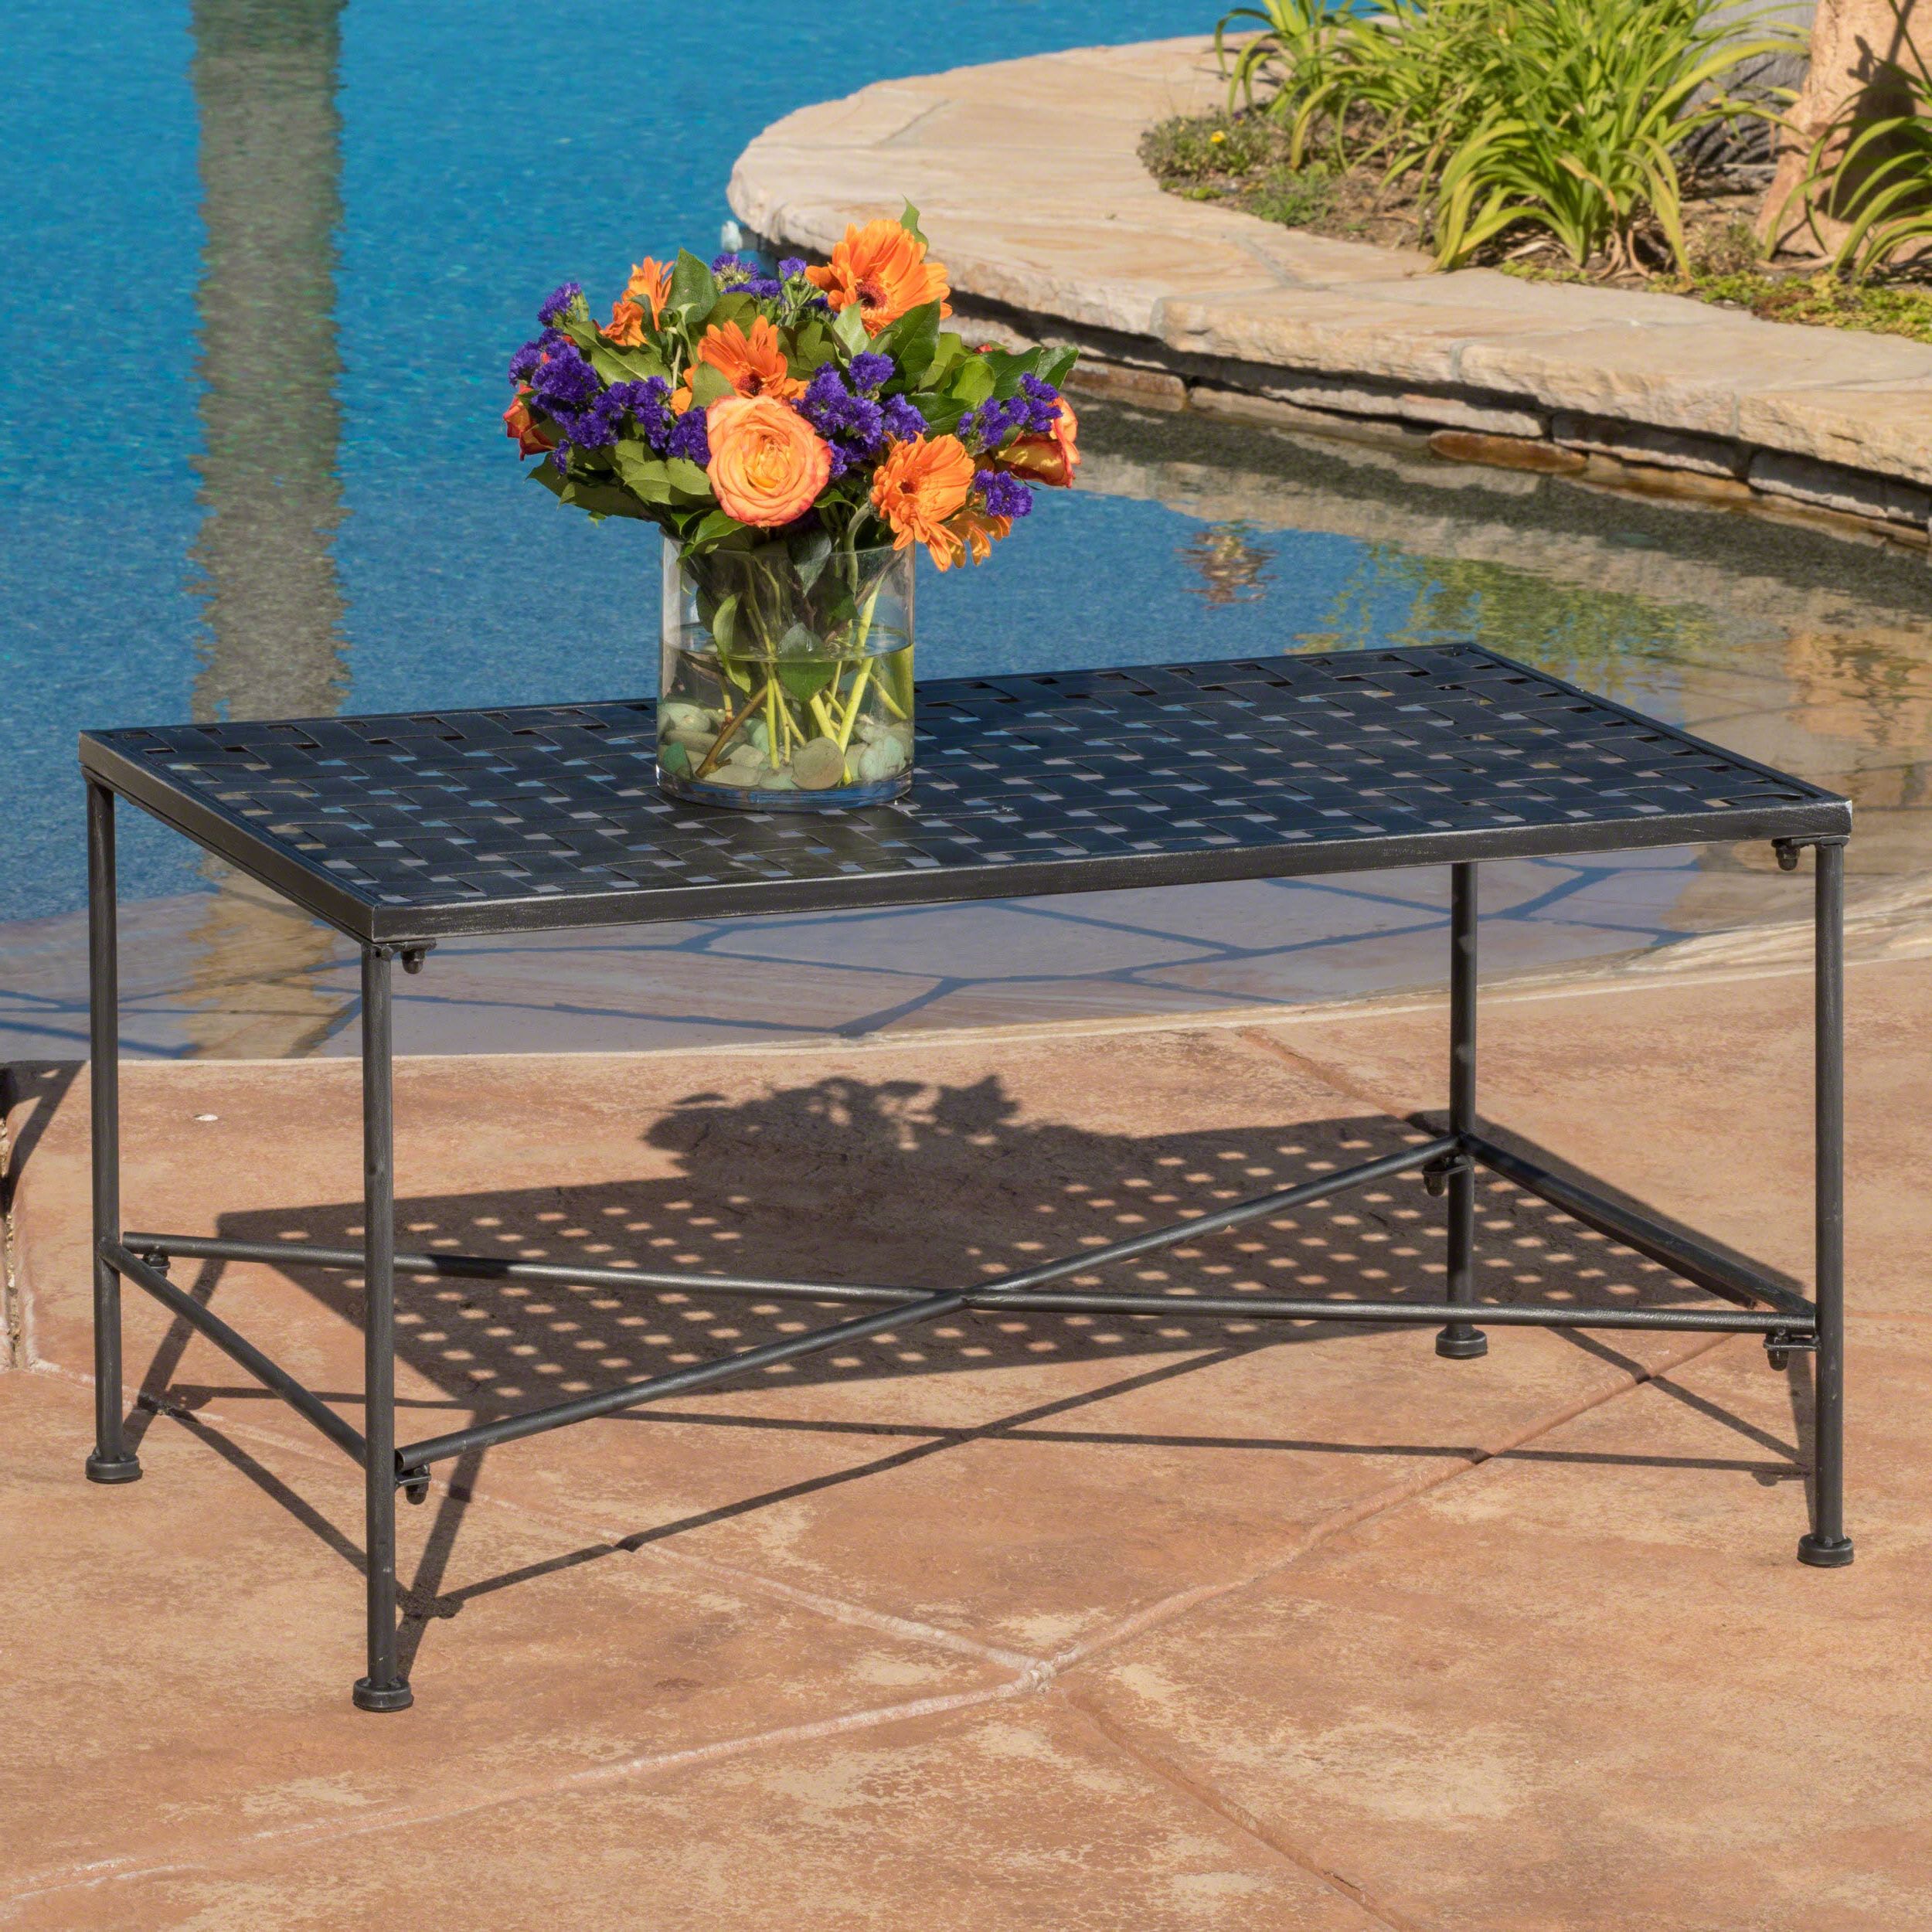 Black Coffee Tables Regarding Widely Used Abilene Black Iron Coffee Table – Walmart – Walmart (View 9 of 20)